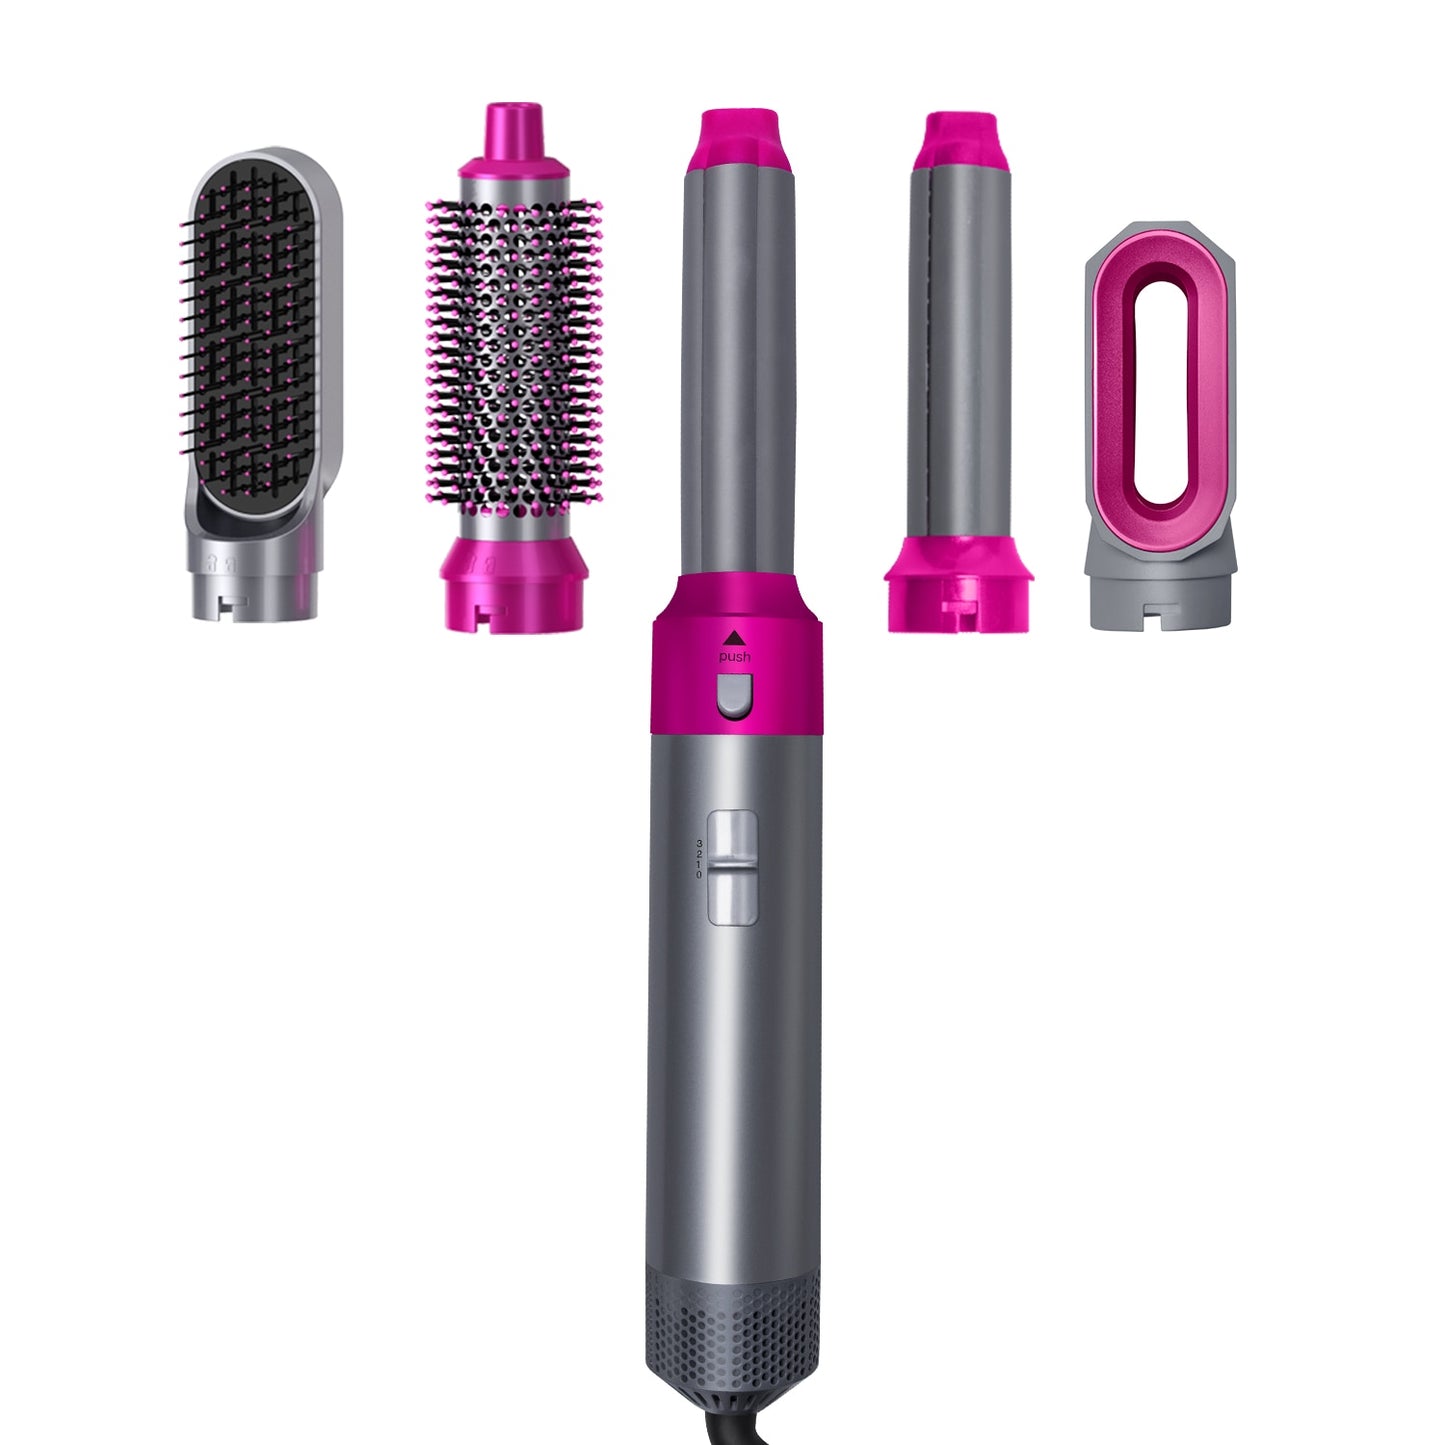 All-In-One Airpro Styler.